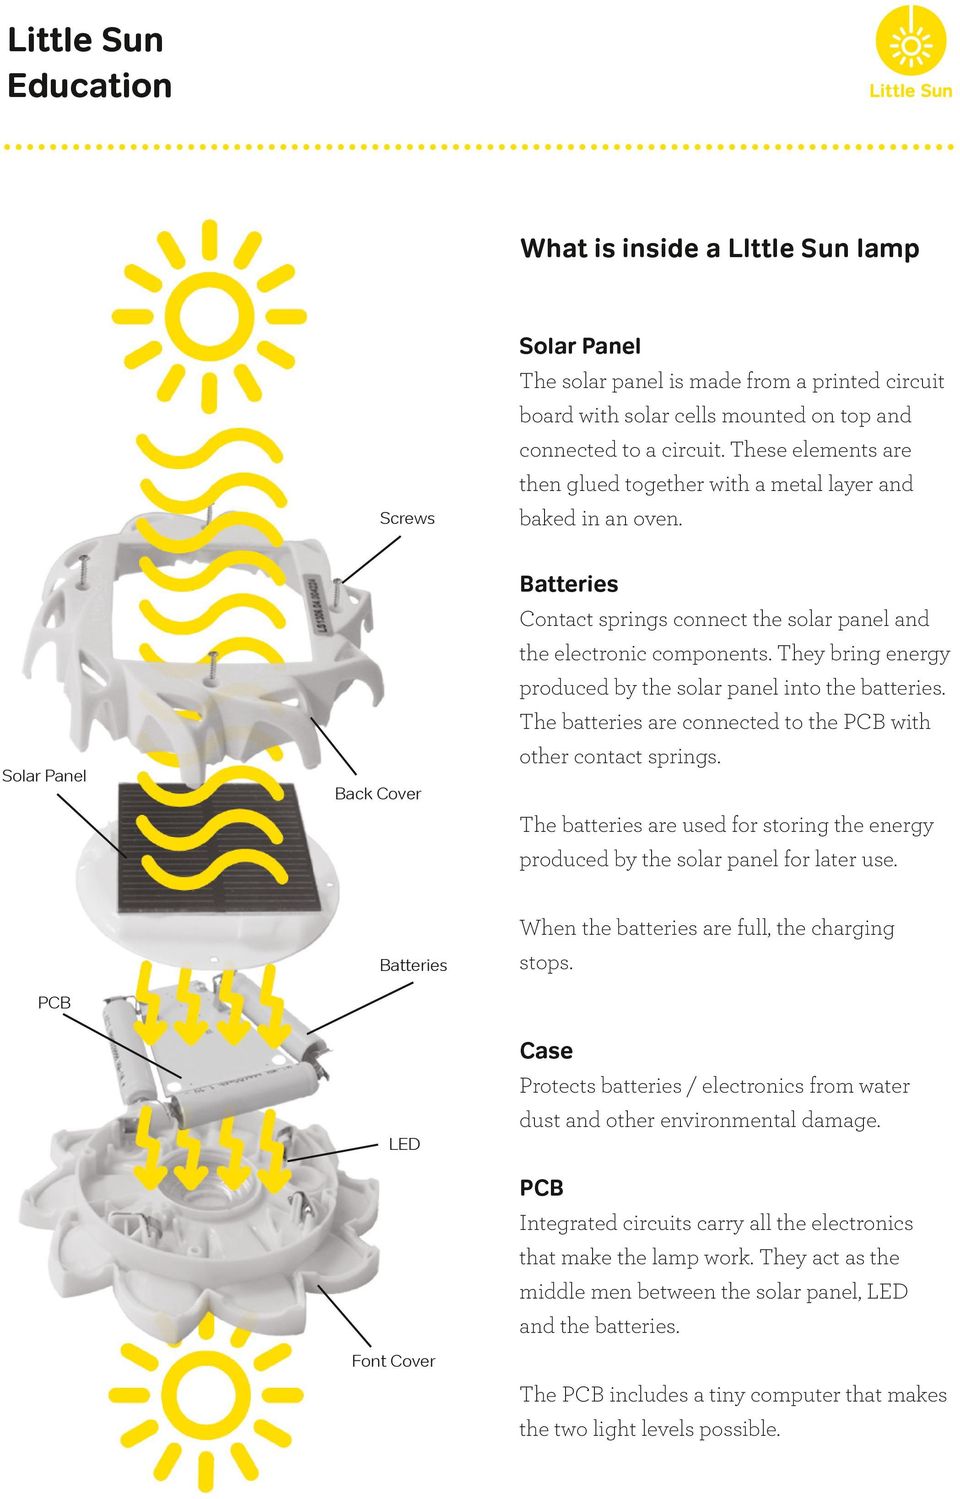 They bring energy produced by the solar panel into the batteries. The batteries are connected to the with other contact springs.